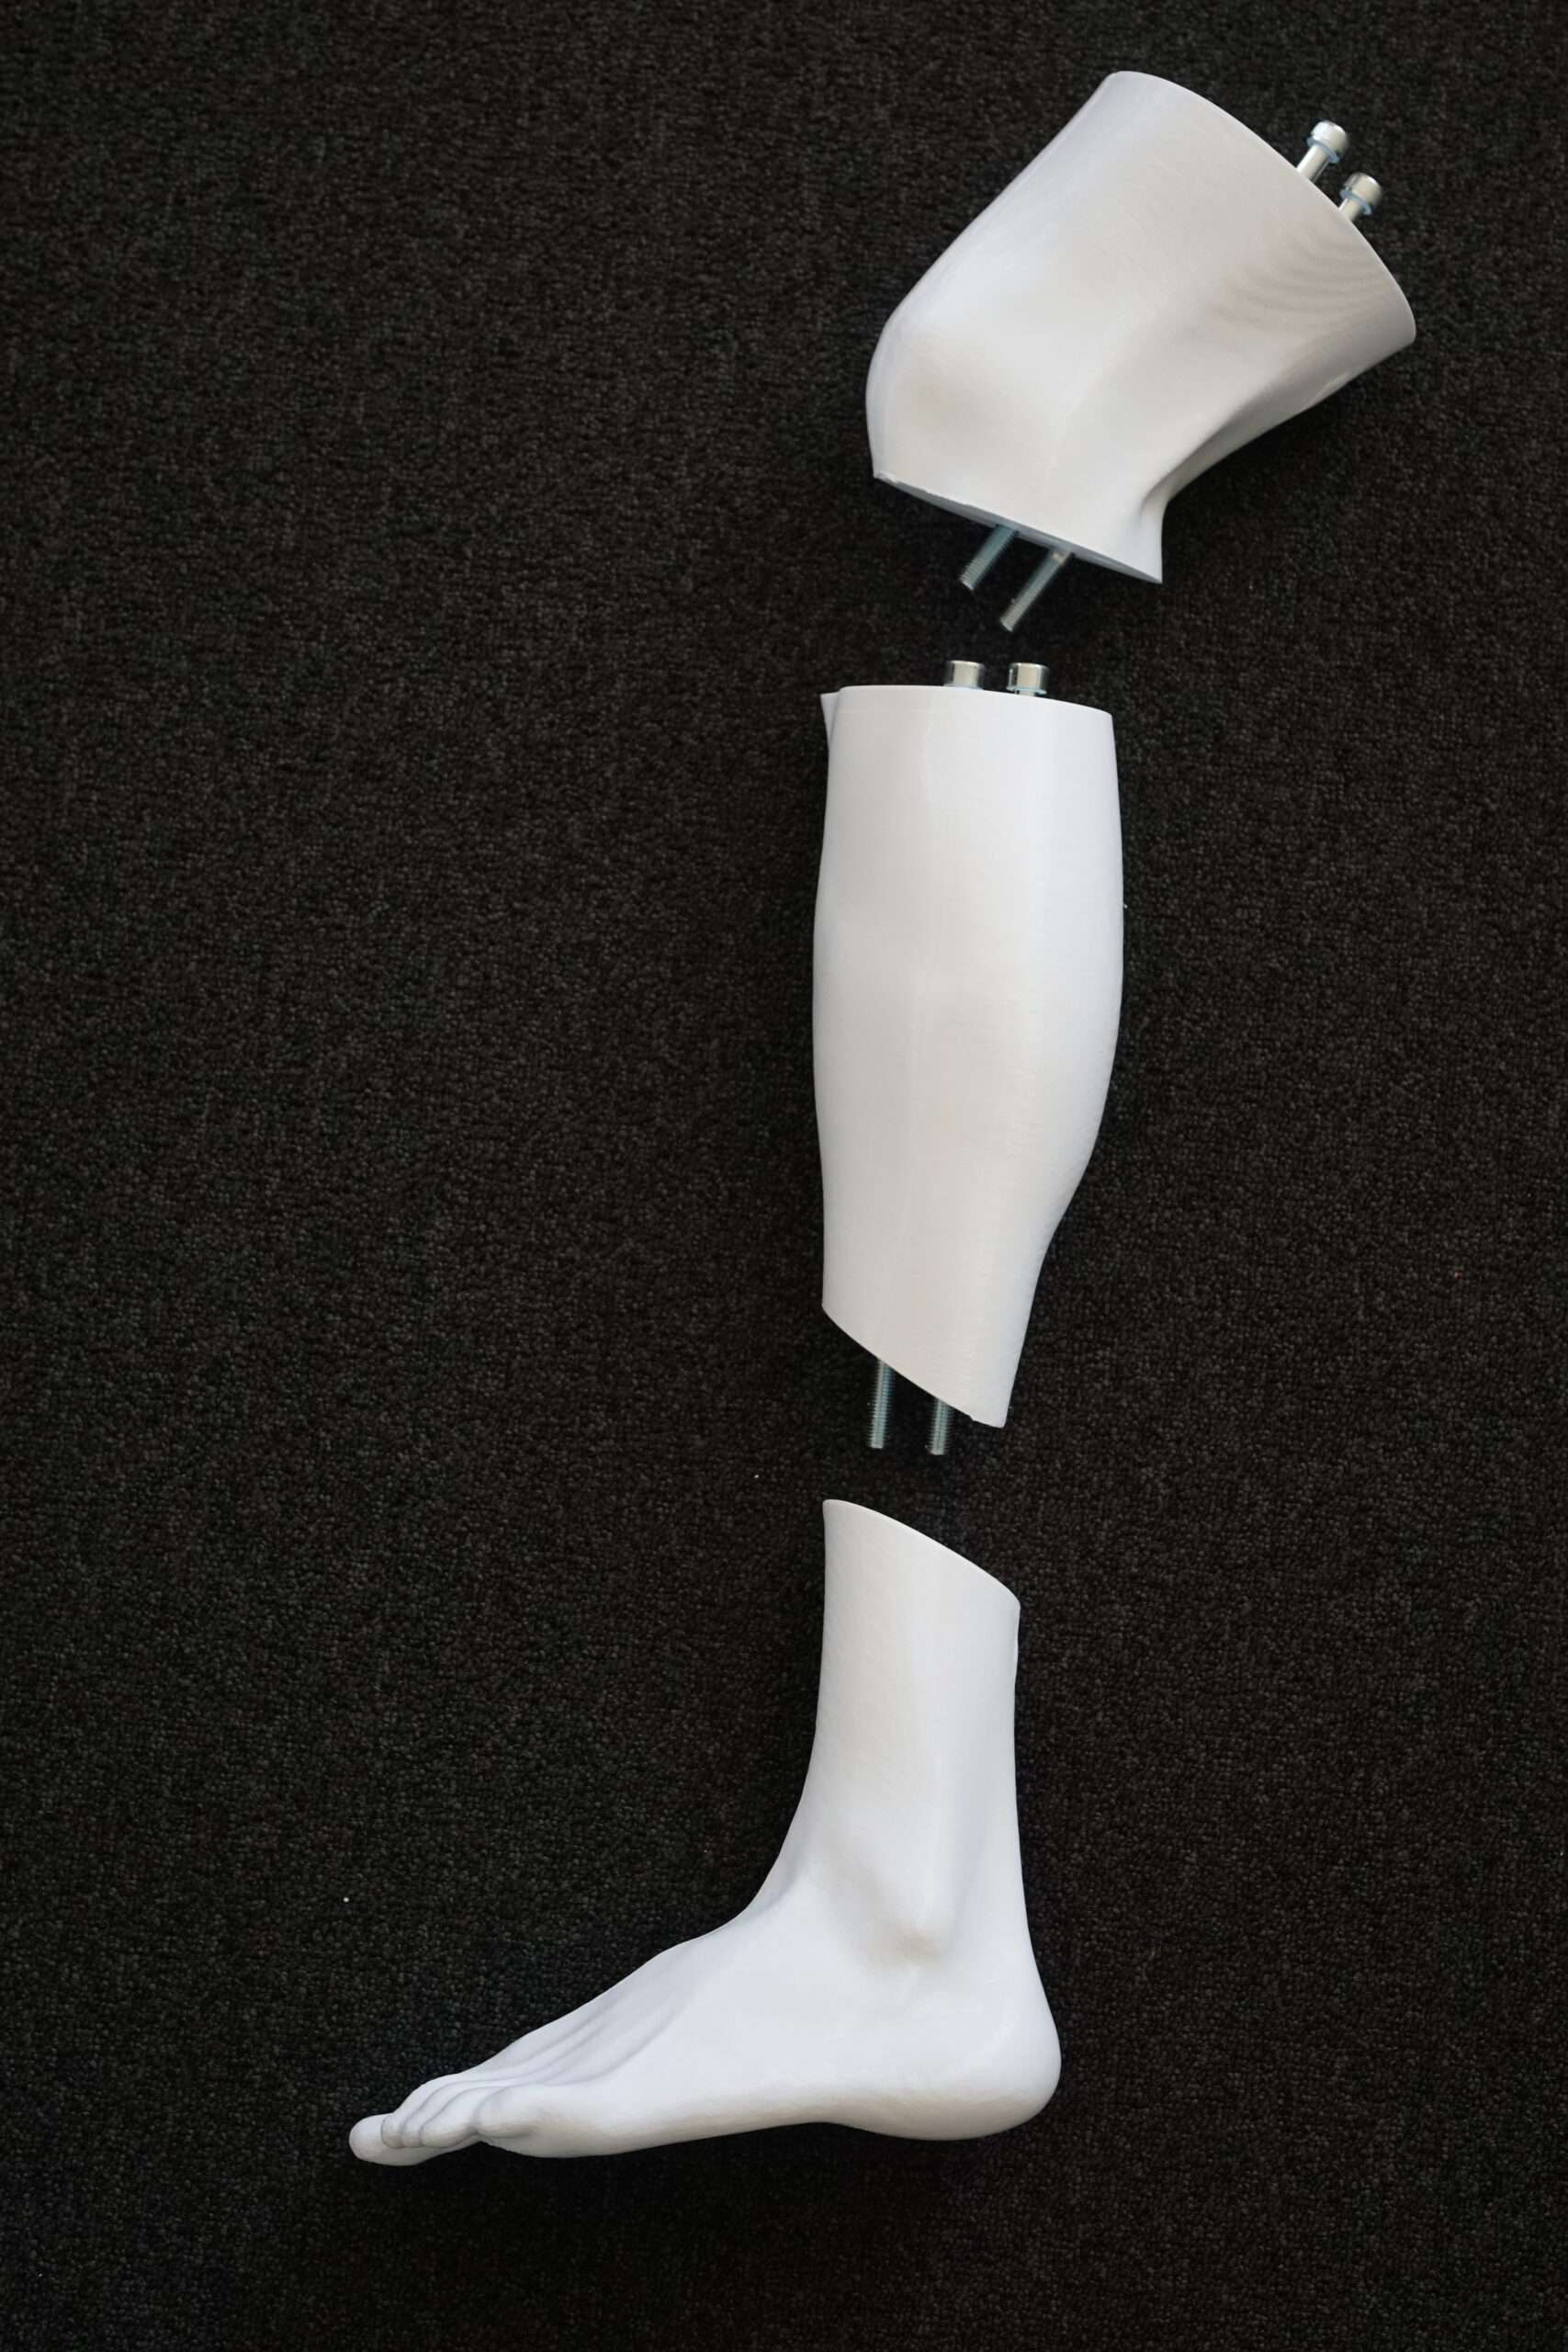 The 3D printed parts can be joined together and mounted to create a customized, full leg model. Photo via Tractus3D.